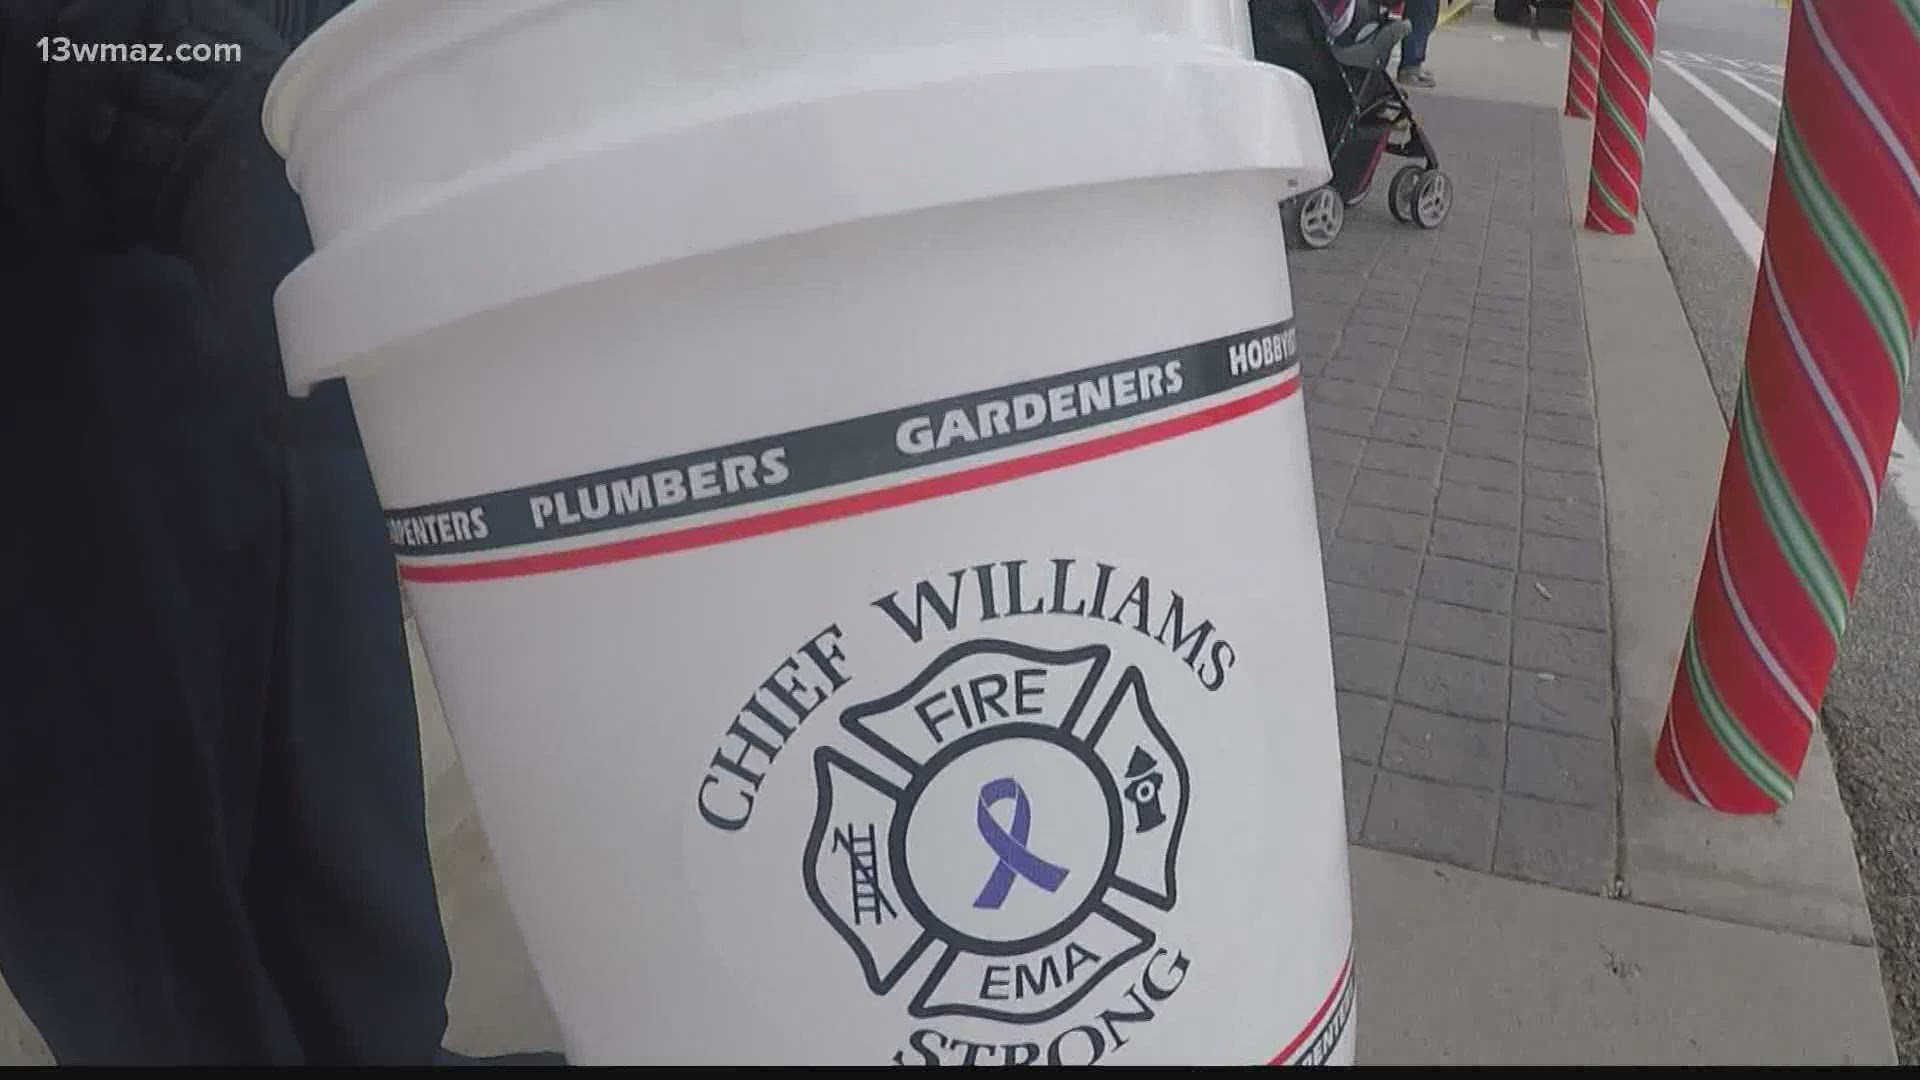 The Warner Robins Fire Department plans on giving muscular dystrophy the boot with its annual fundraiser